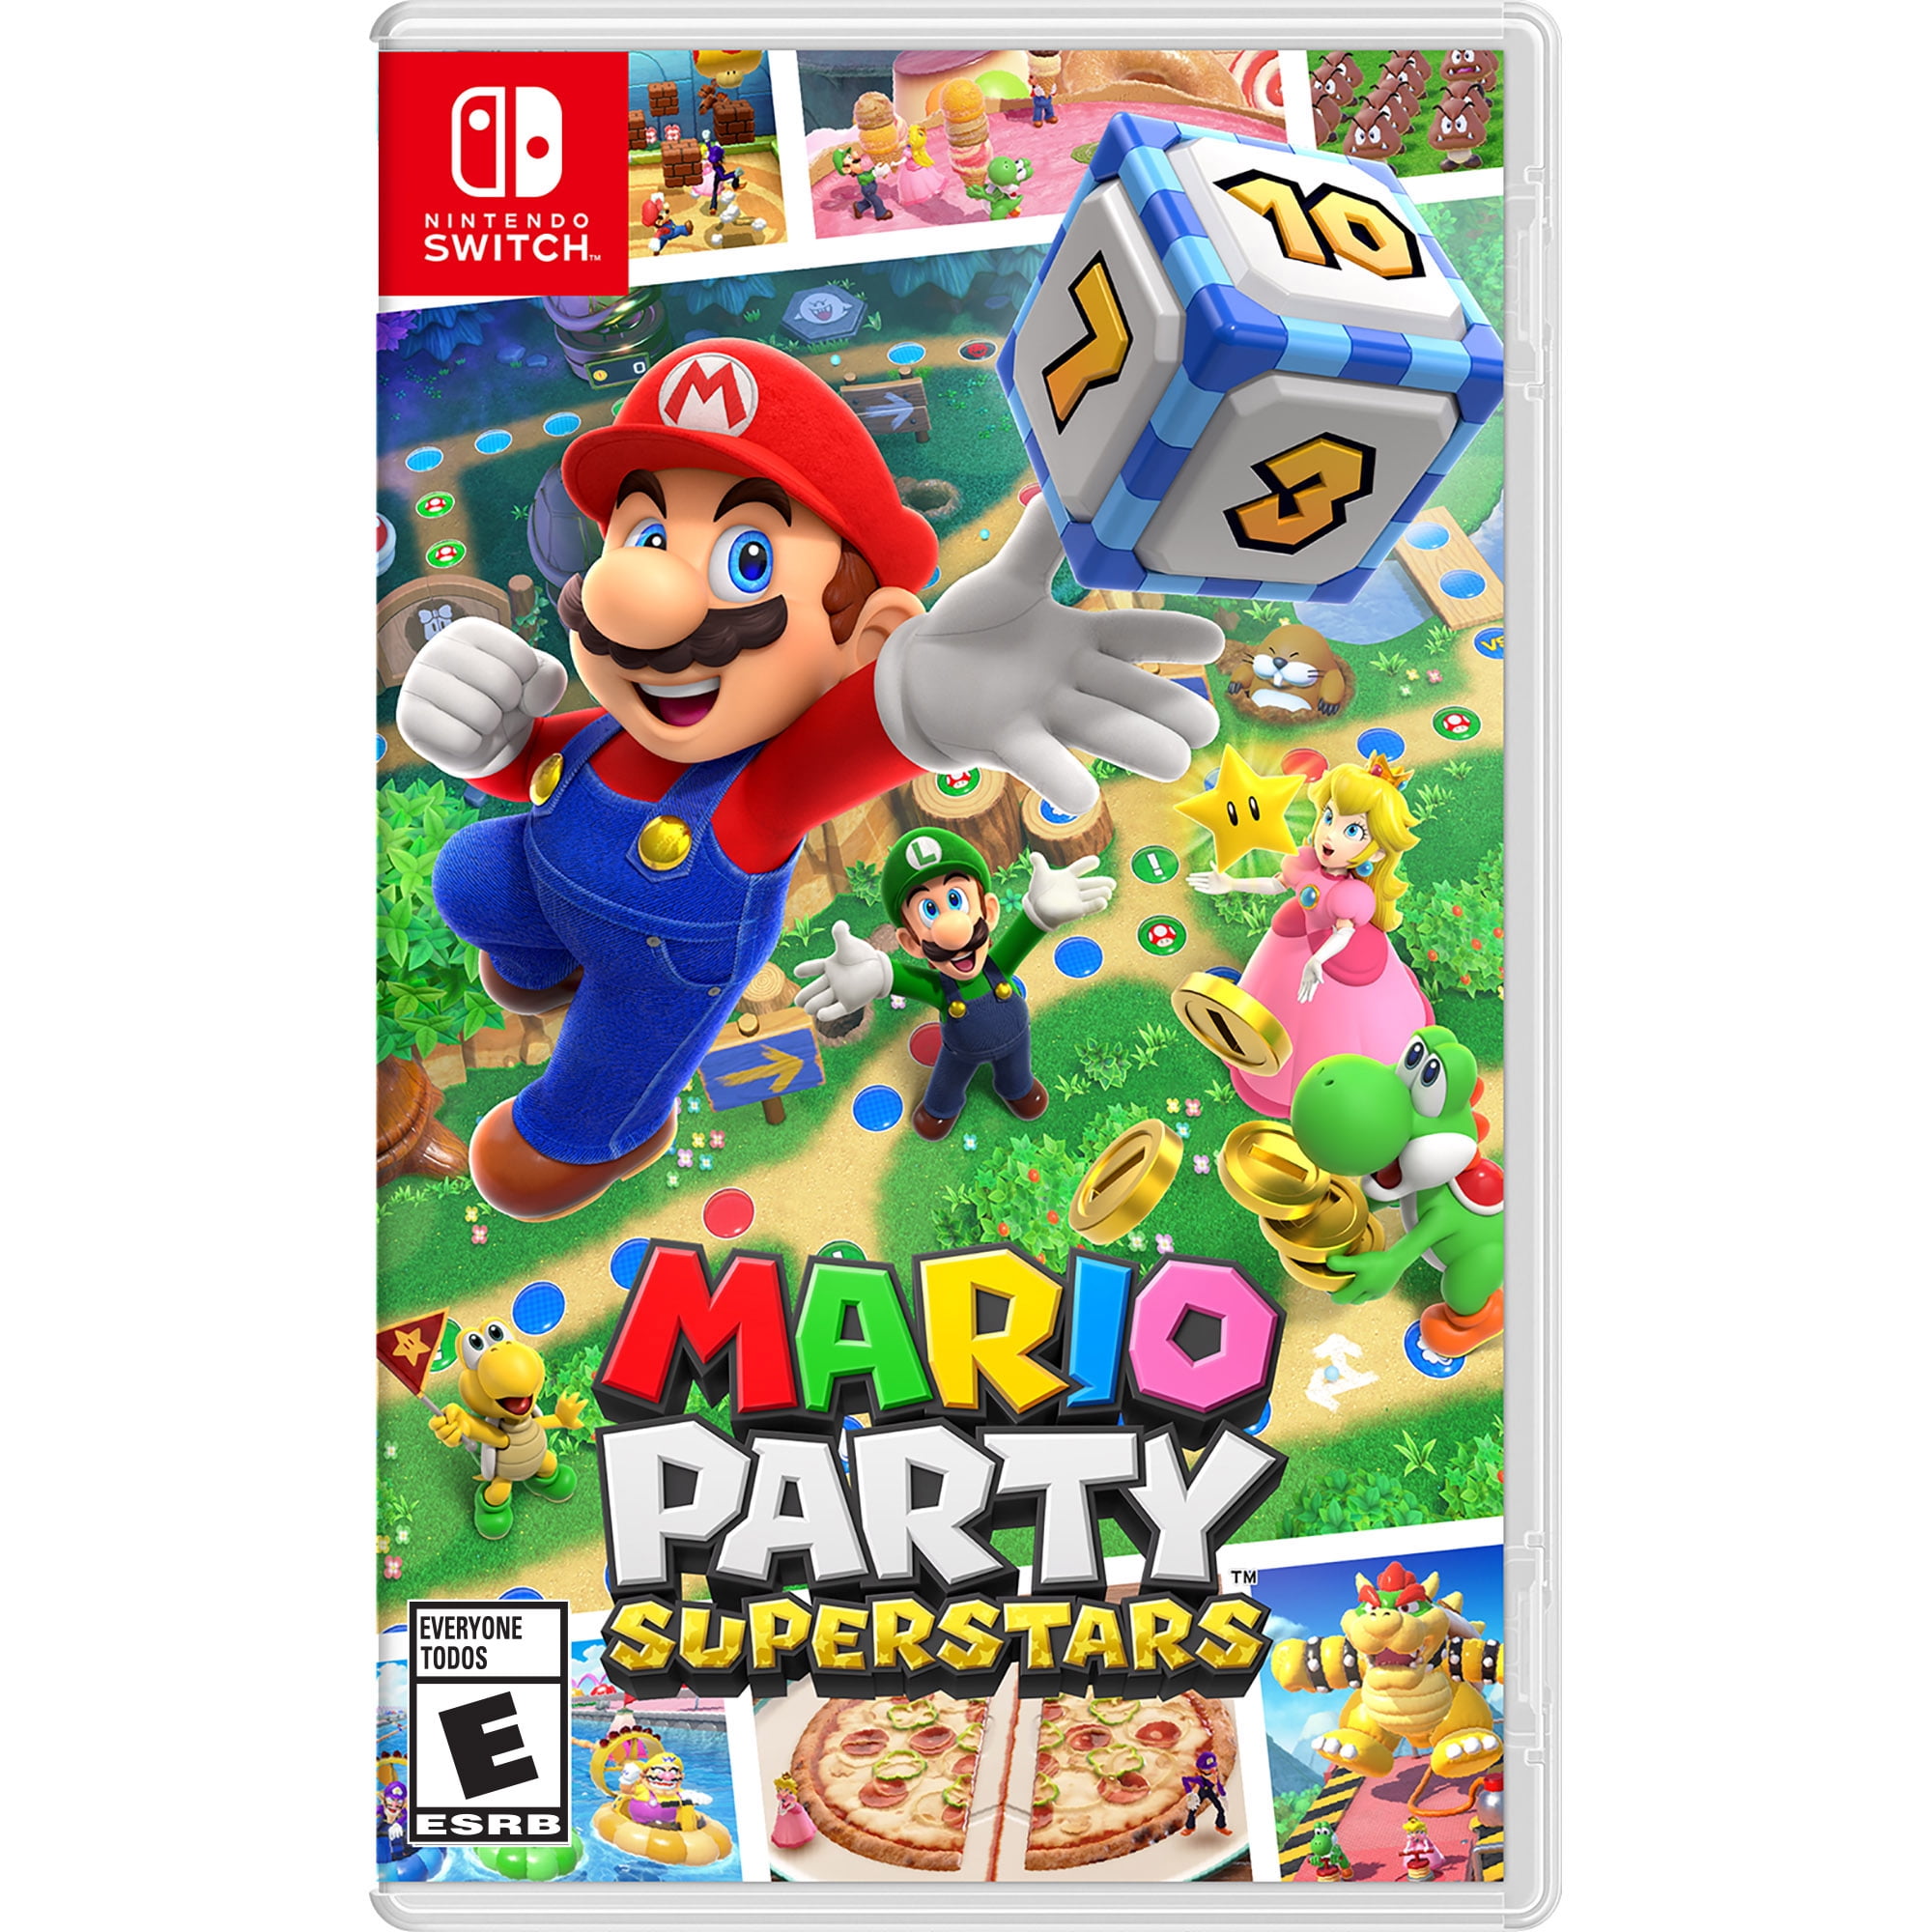 6 Things I Learned While Playing 'Mario Party Superstars' With My